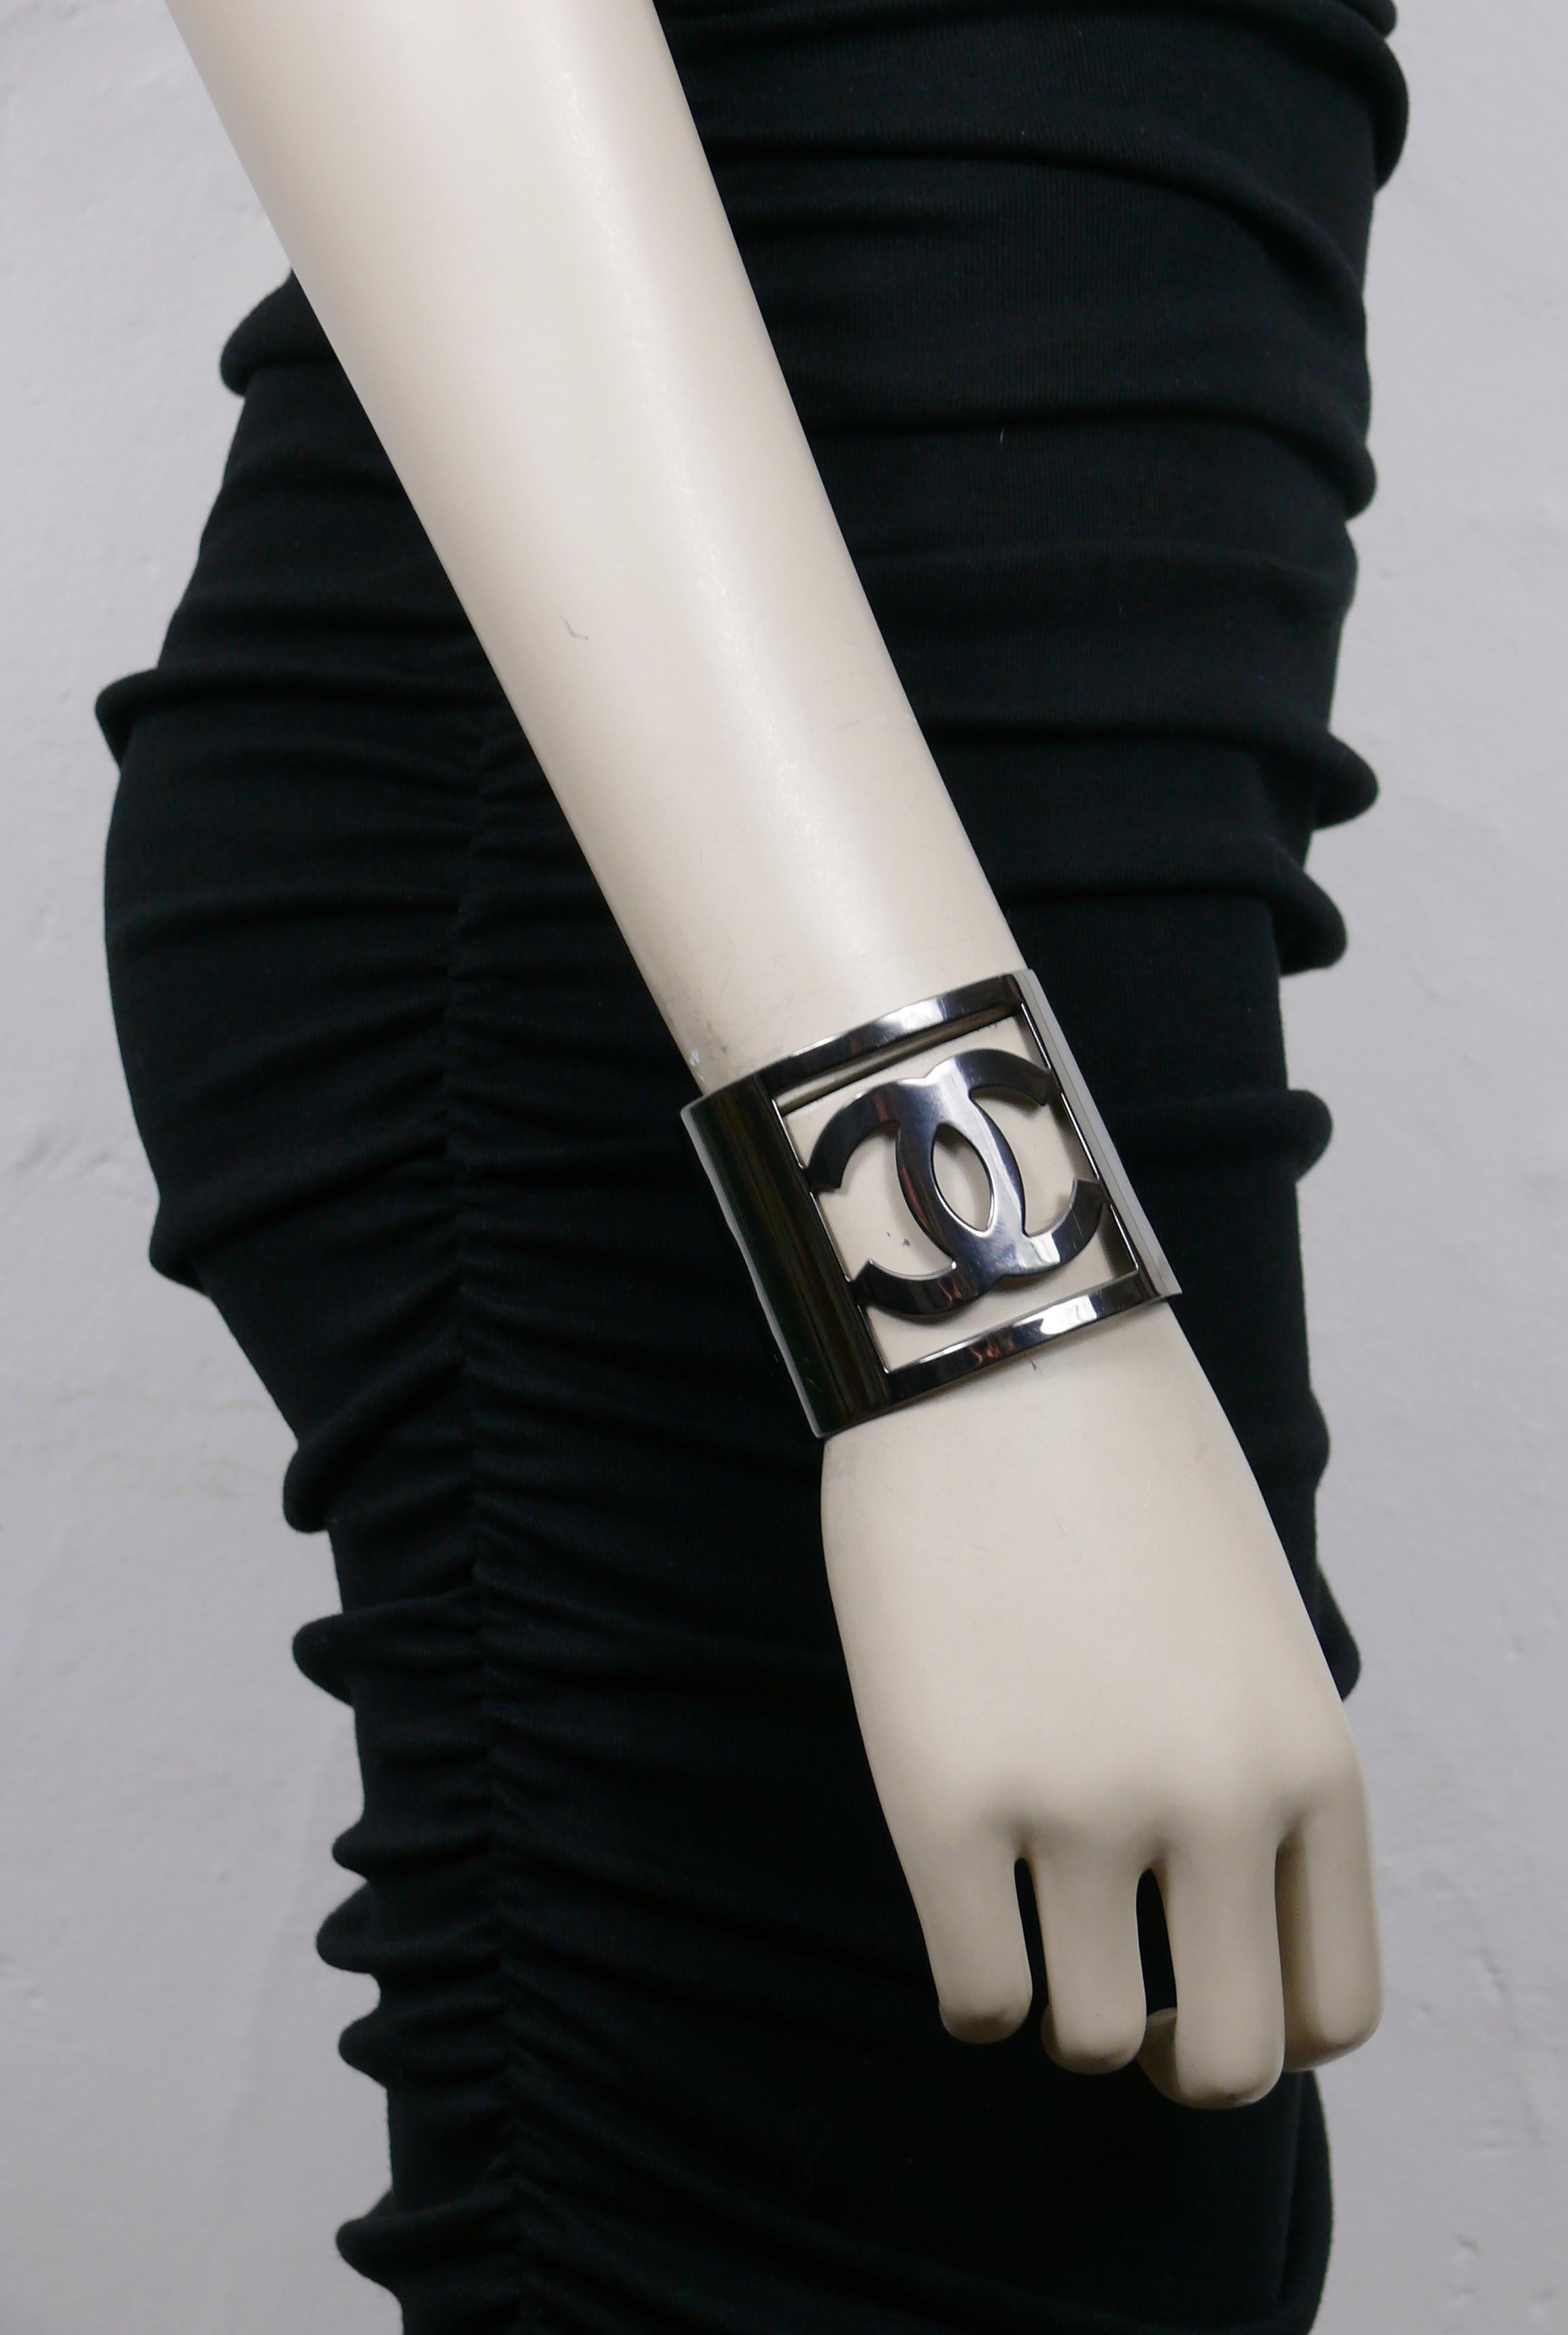 CHANEL by KARL LAGERFELD polished ruthenium tone cuff bracelet featuring a large cut-out CC logo at the center.

From the Autumn/Winter 2006 Collection.

Embossed CHANEL 06 A Made in France.

Indicative measurements : inner circumference approx.